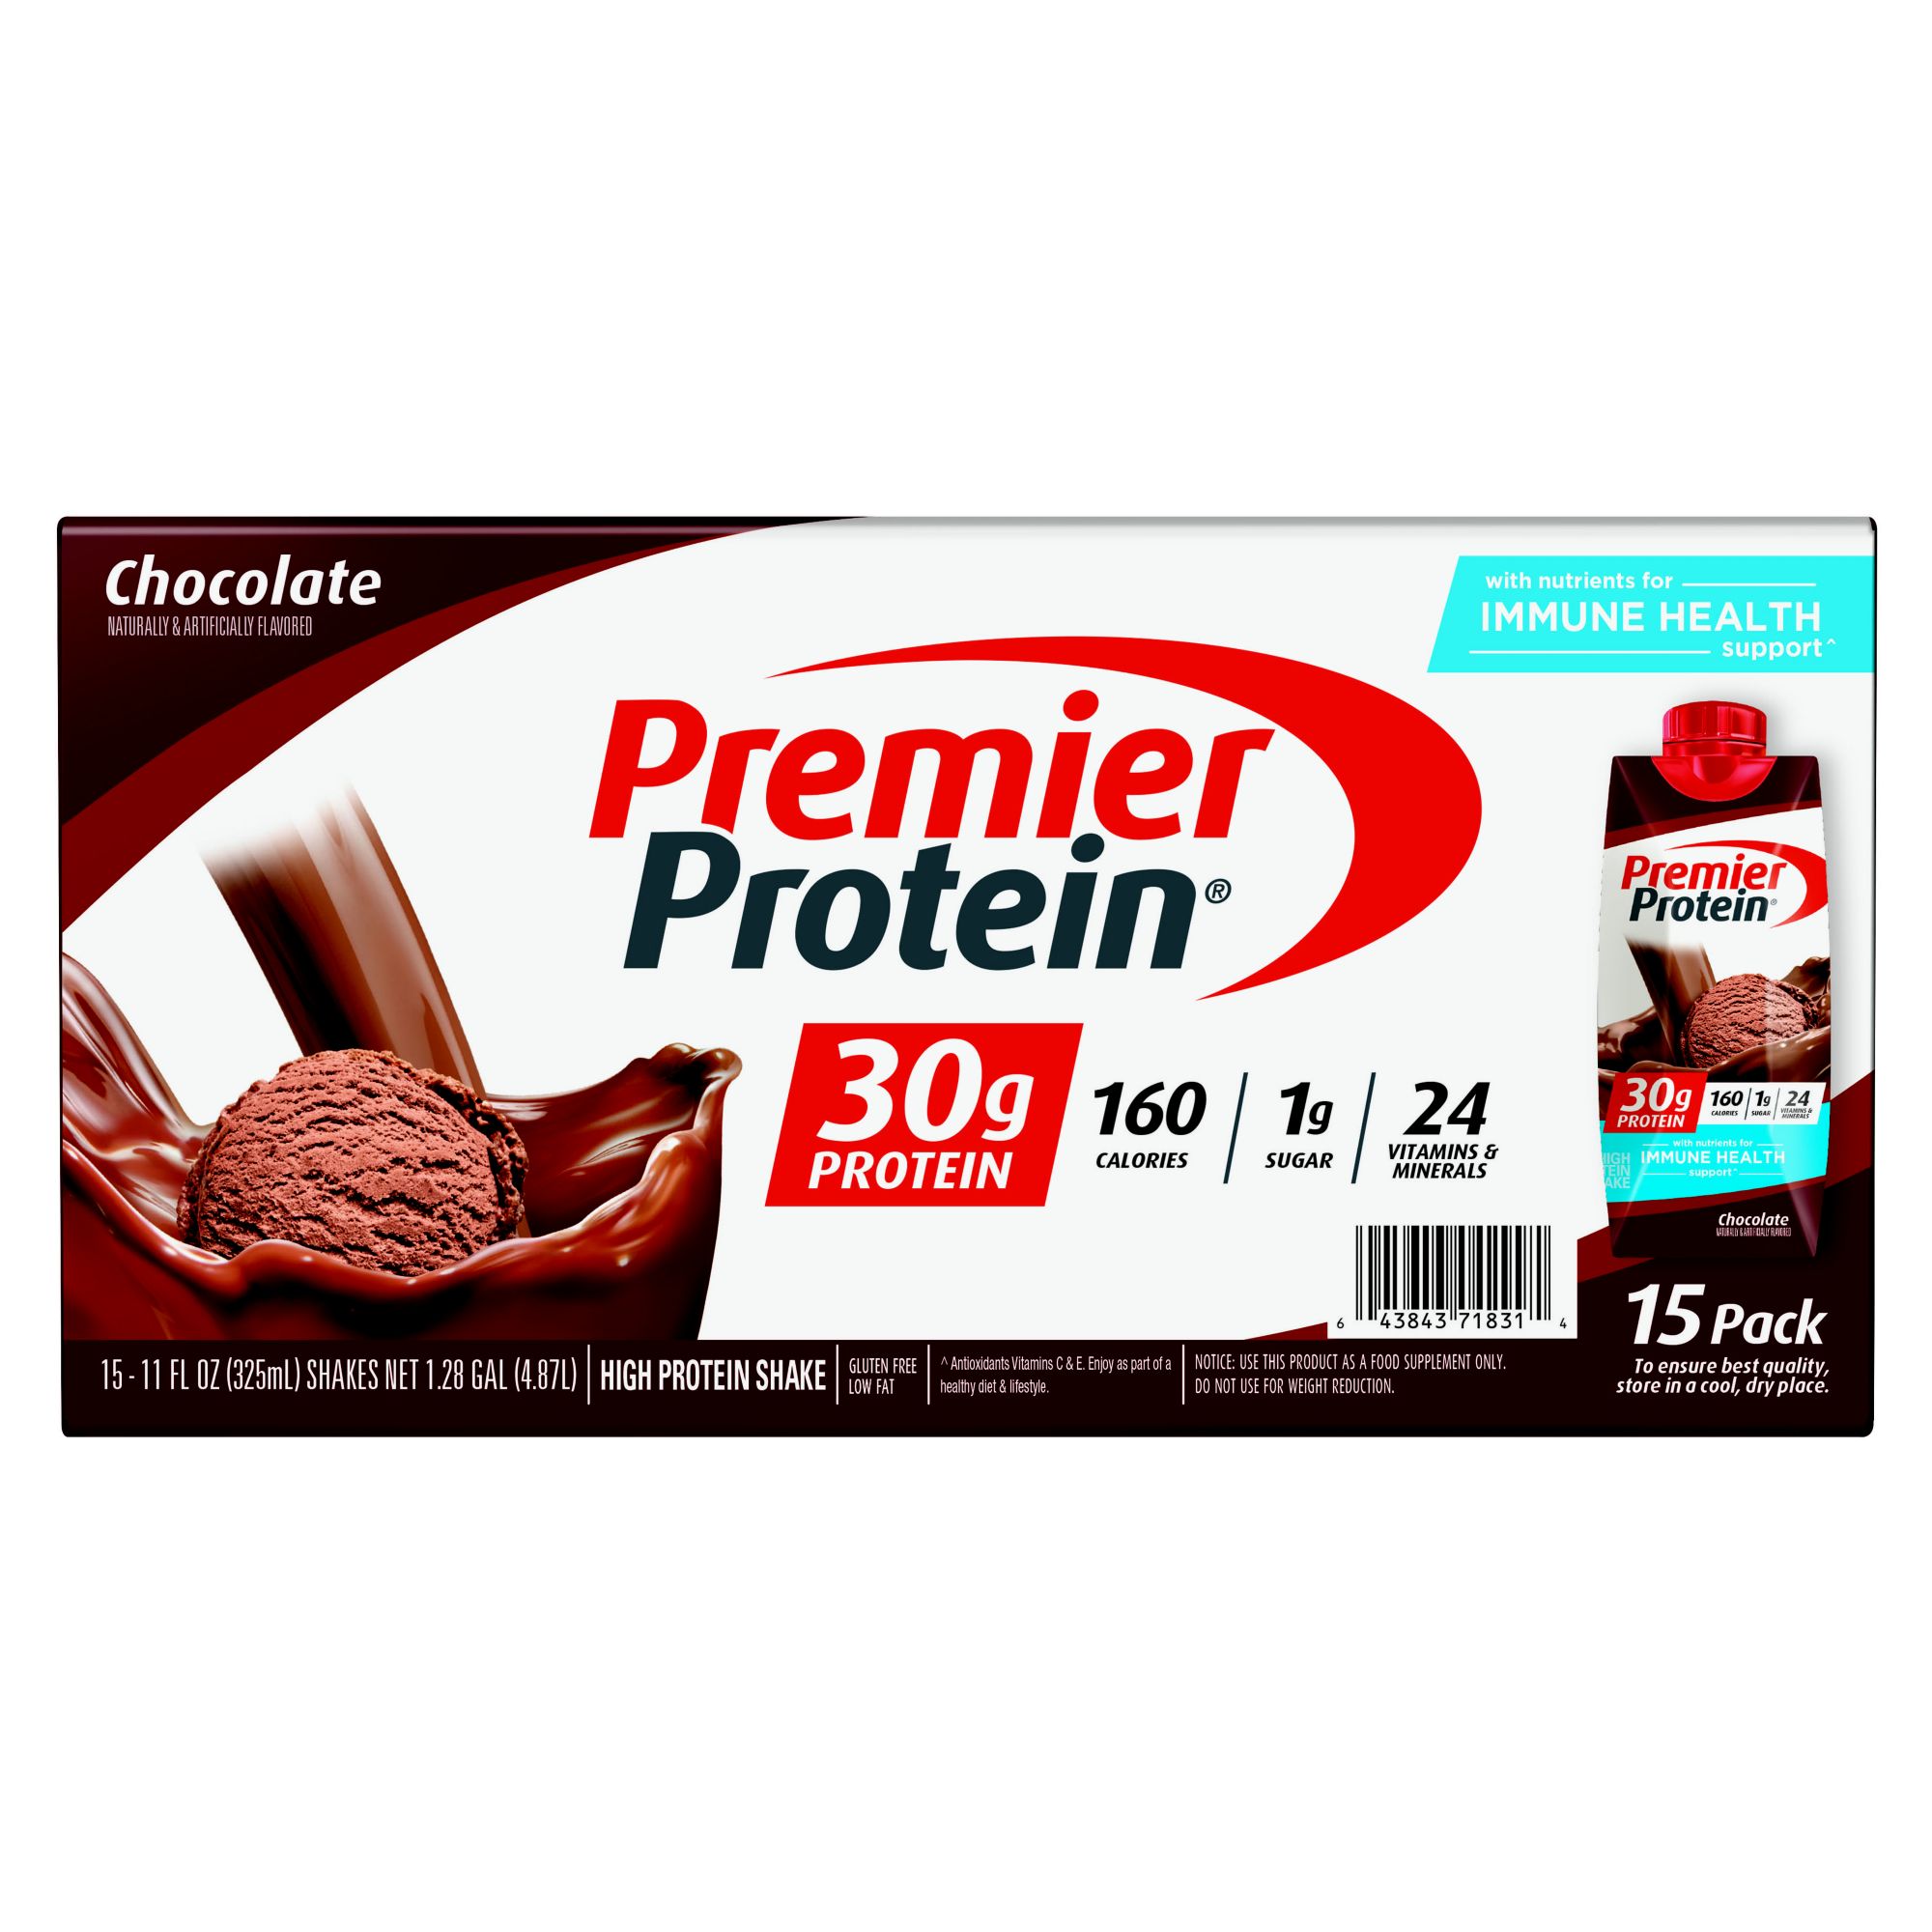 Ready Chocolate Peanut Butter Flavored Clean Protein Bars - 5 oz